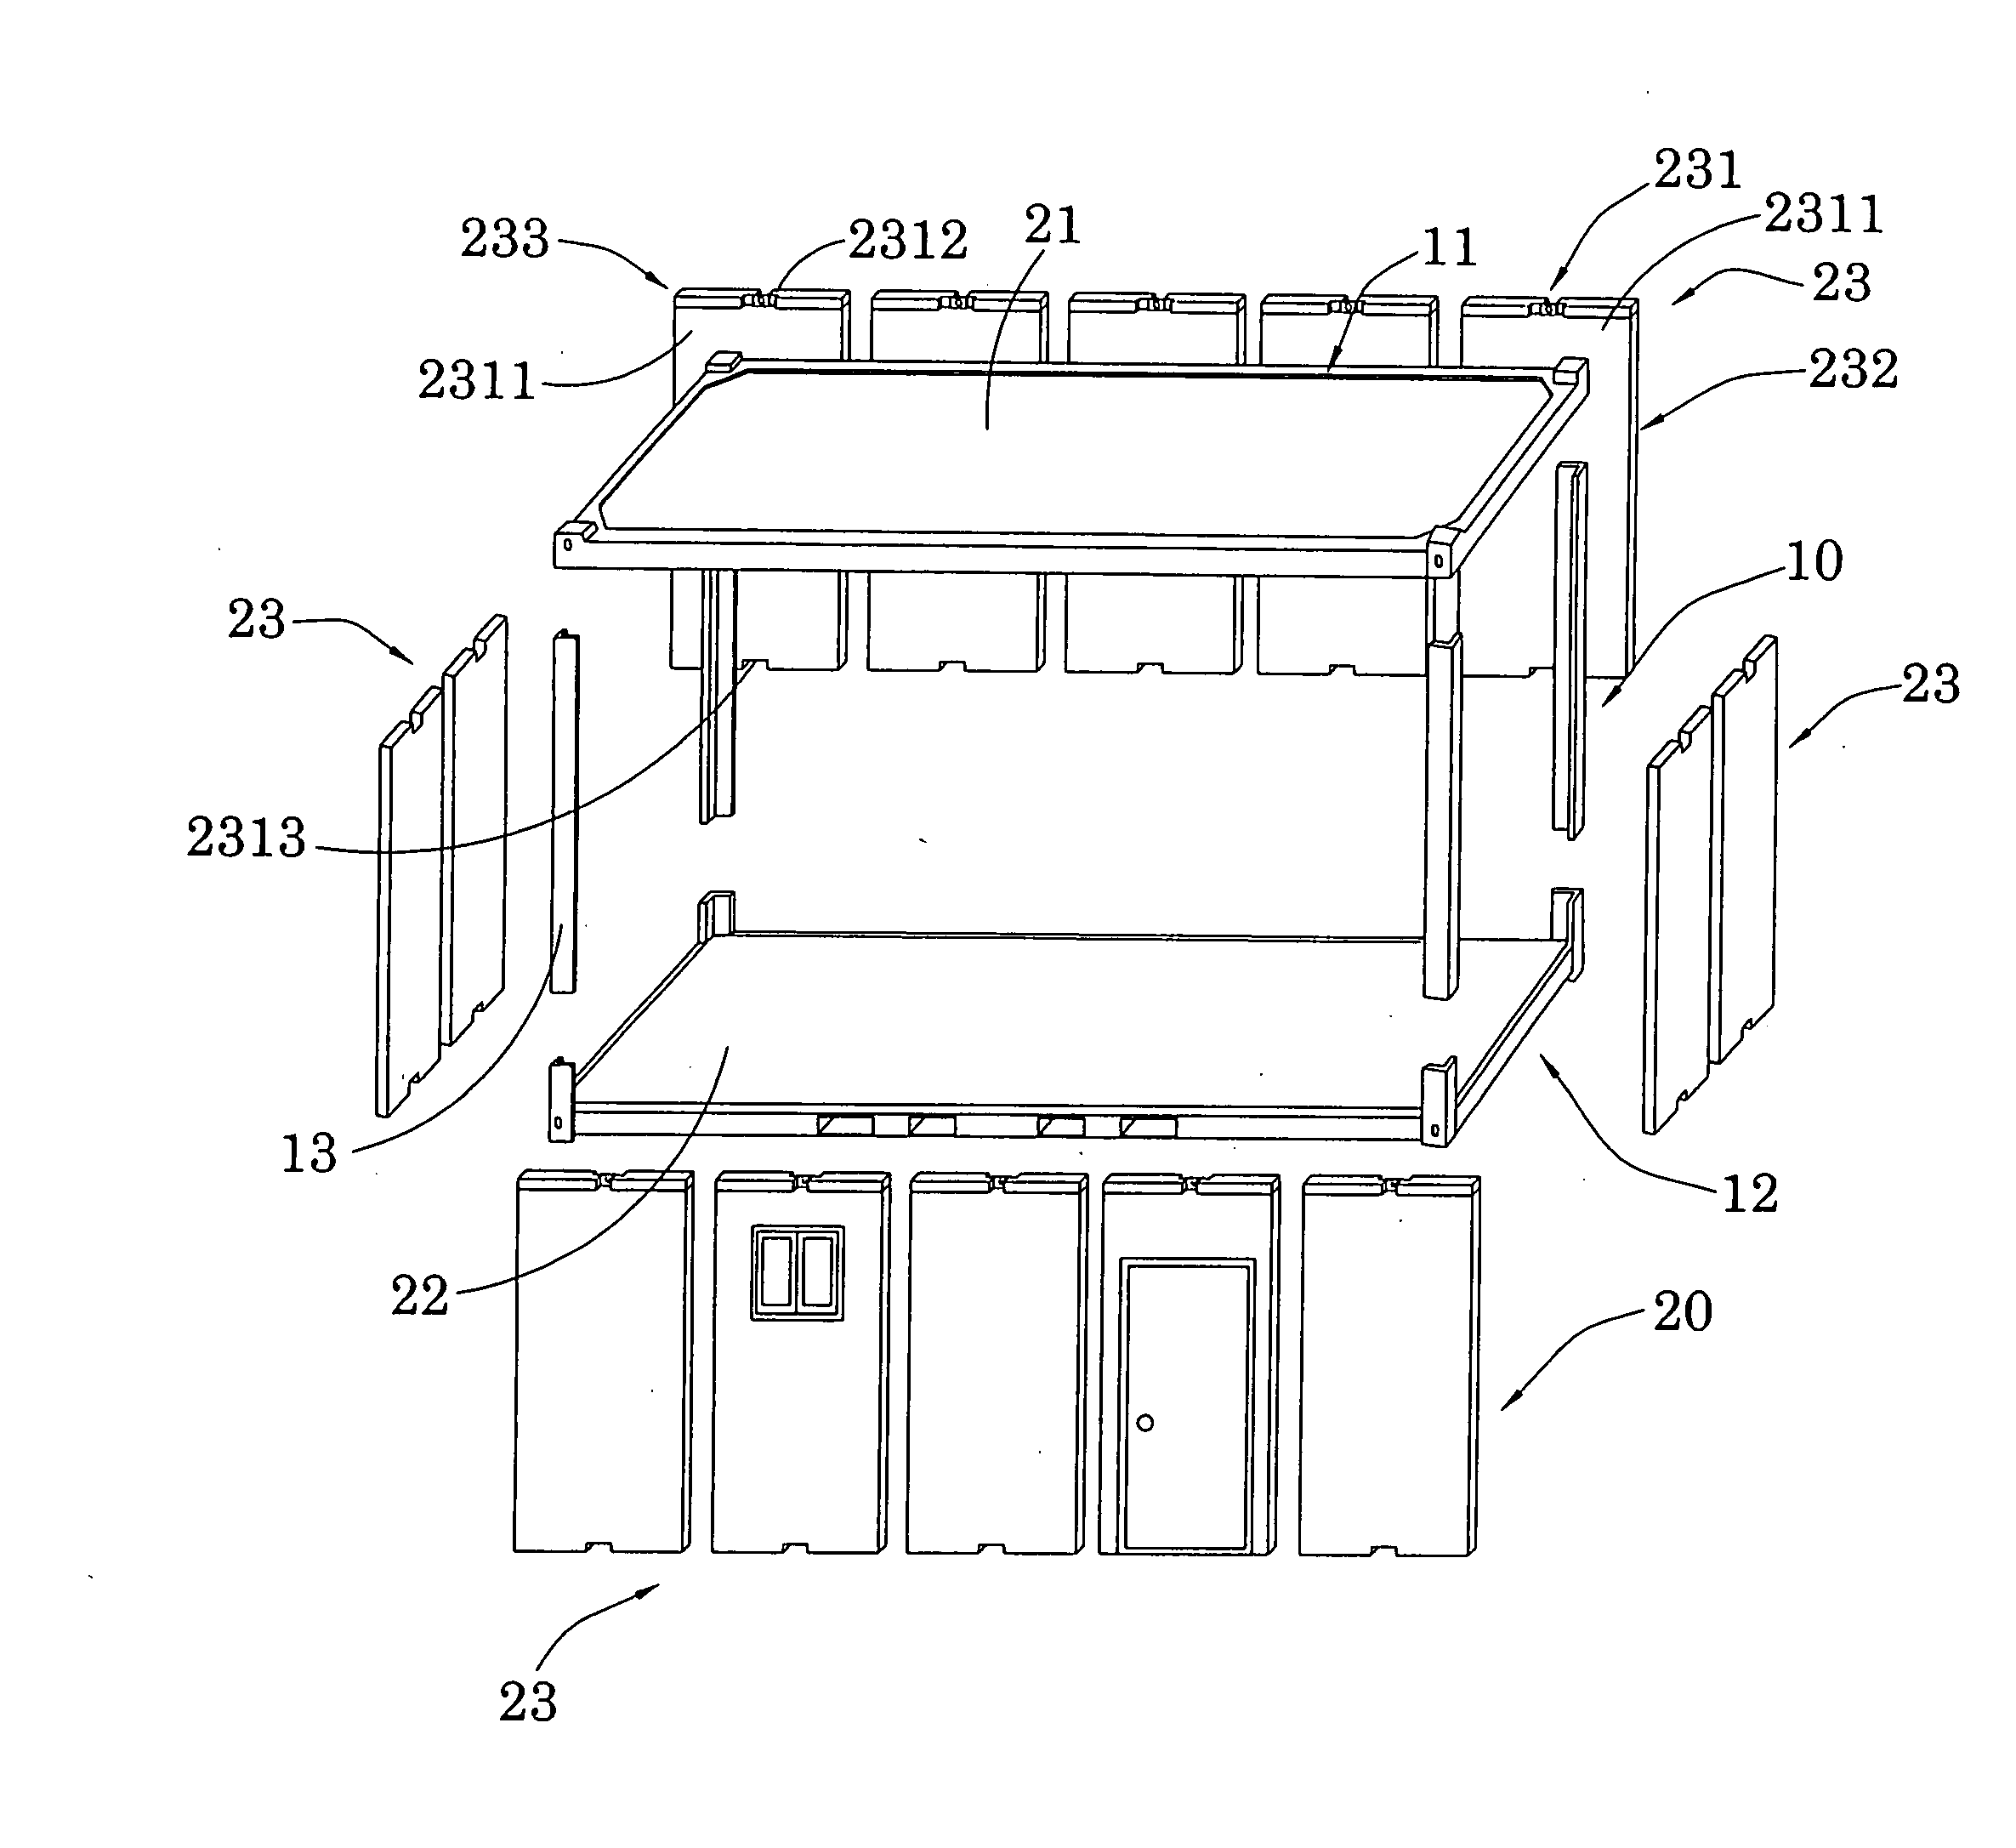 Wall panel affixing arrangement for portable work and storage container